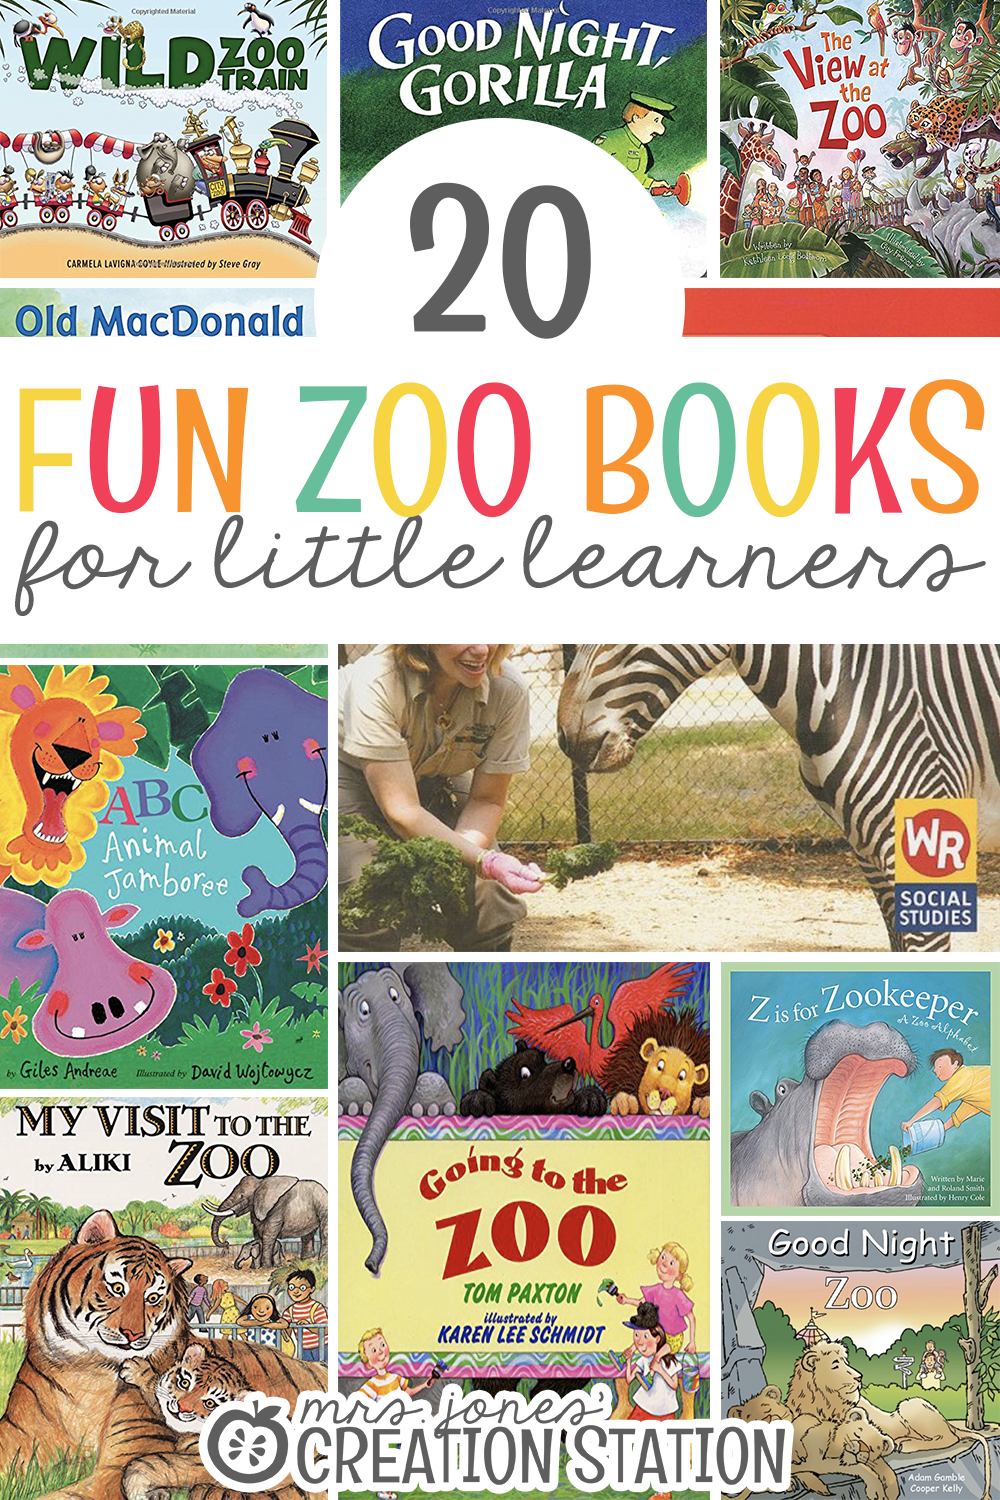 20 Zoo Books for Little Learners - Mrs. Jones Creation Station